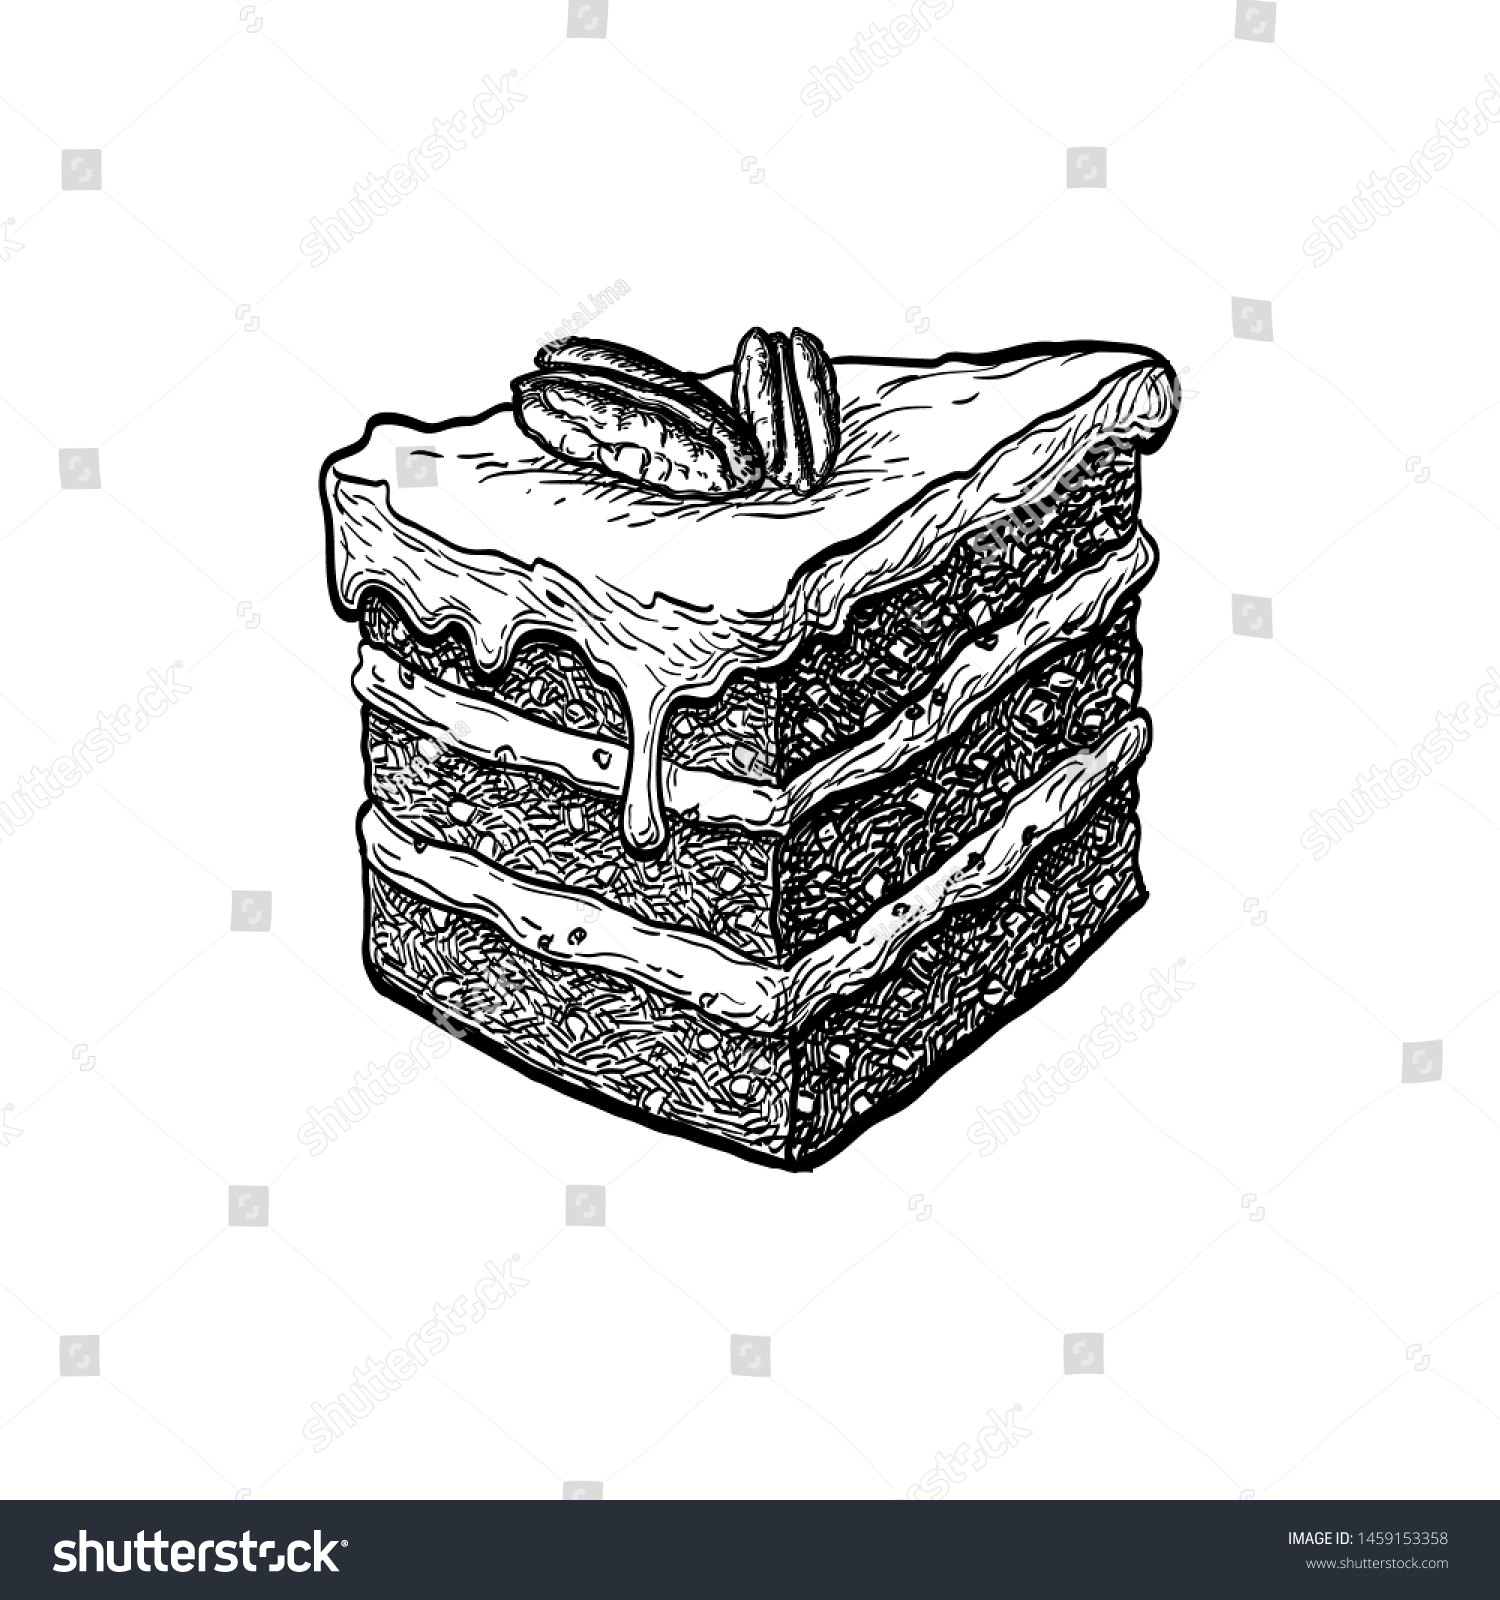 SVG of Carrot cake. Ink sketch isolated on white background. Hand drawn vector illustration. Retro style. svg